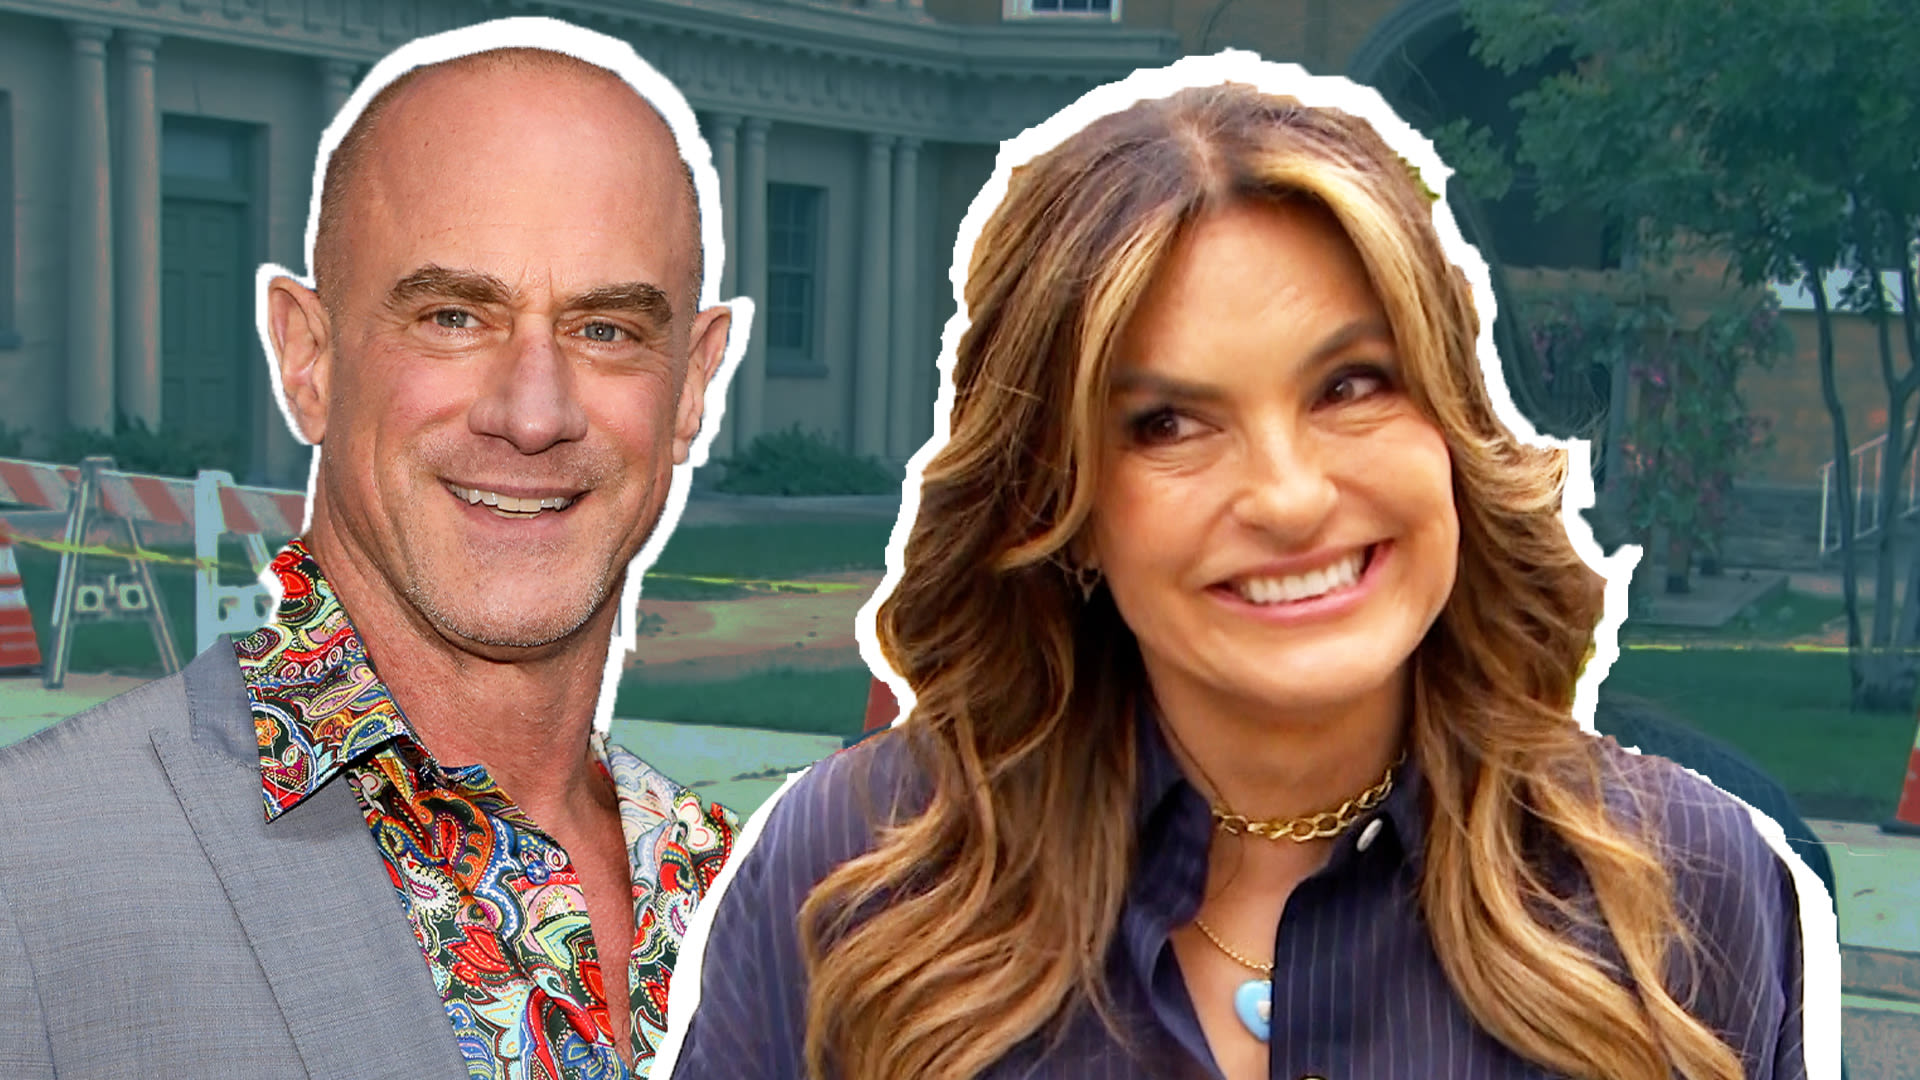 Mariska Hargitay Knew Christopher Meloni Was ‘The Guy’ During ‘Law & Order: SVU’ Audition | Access